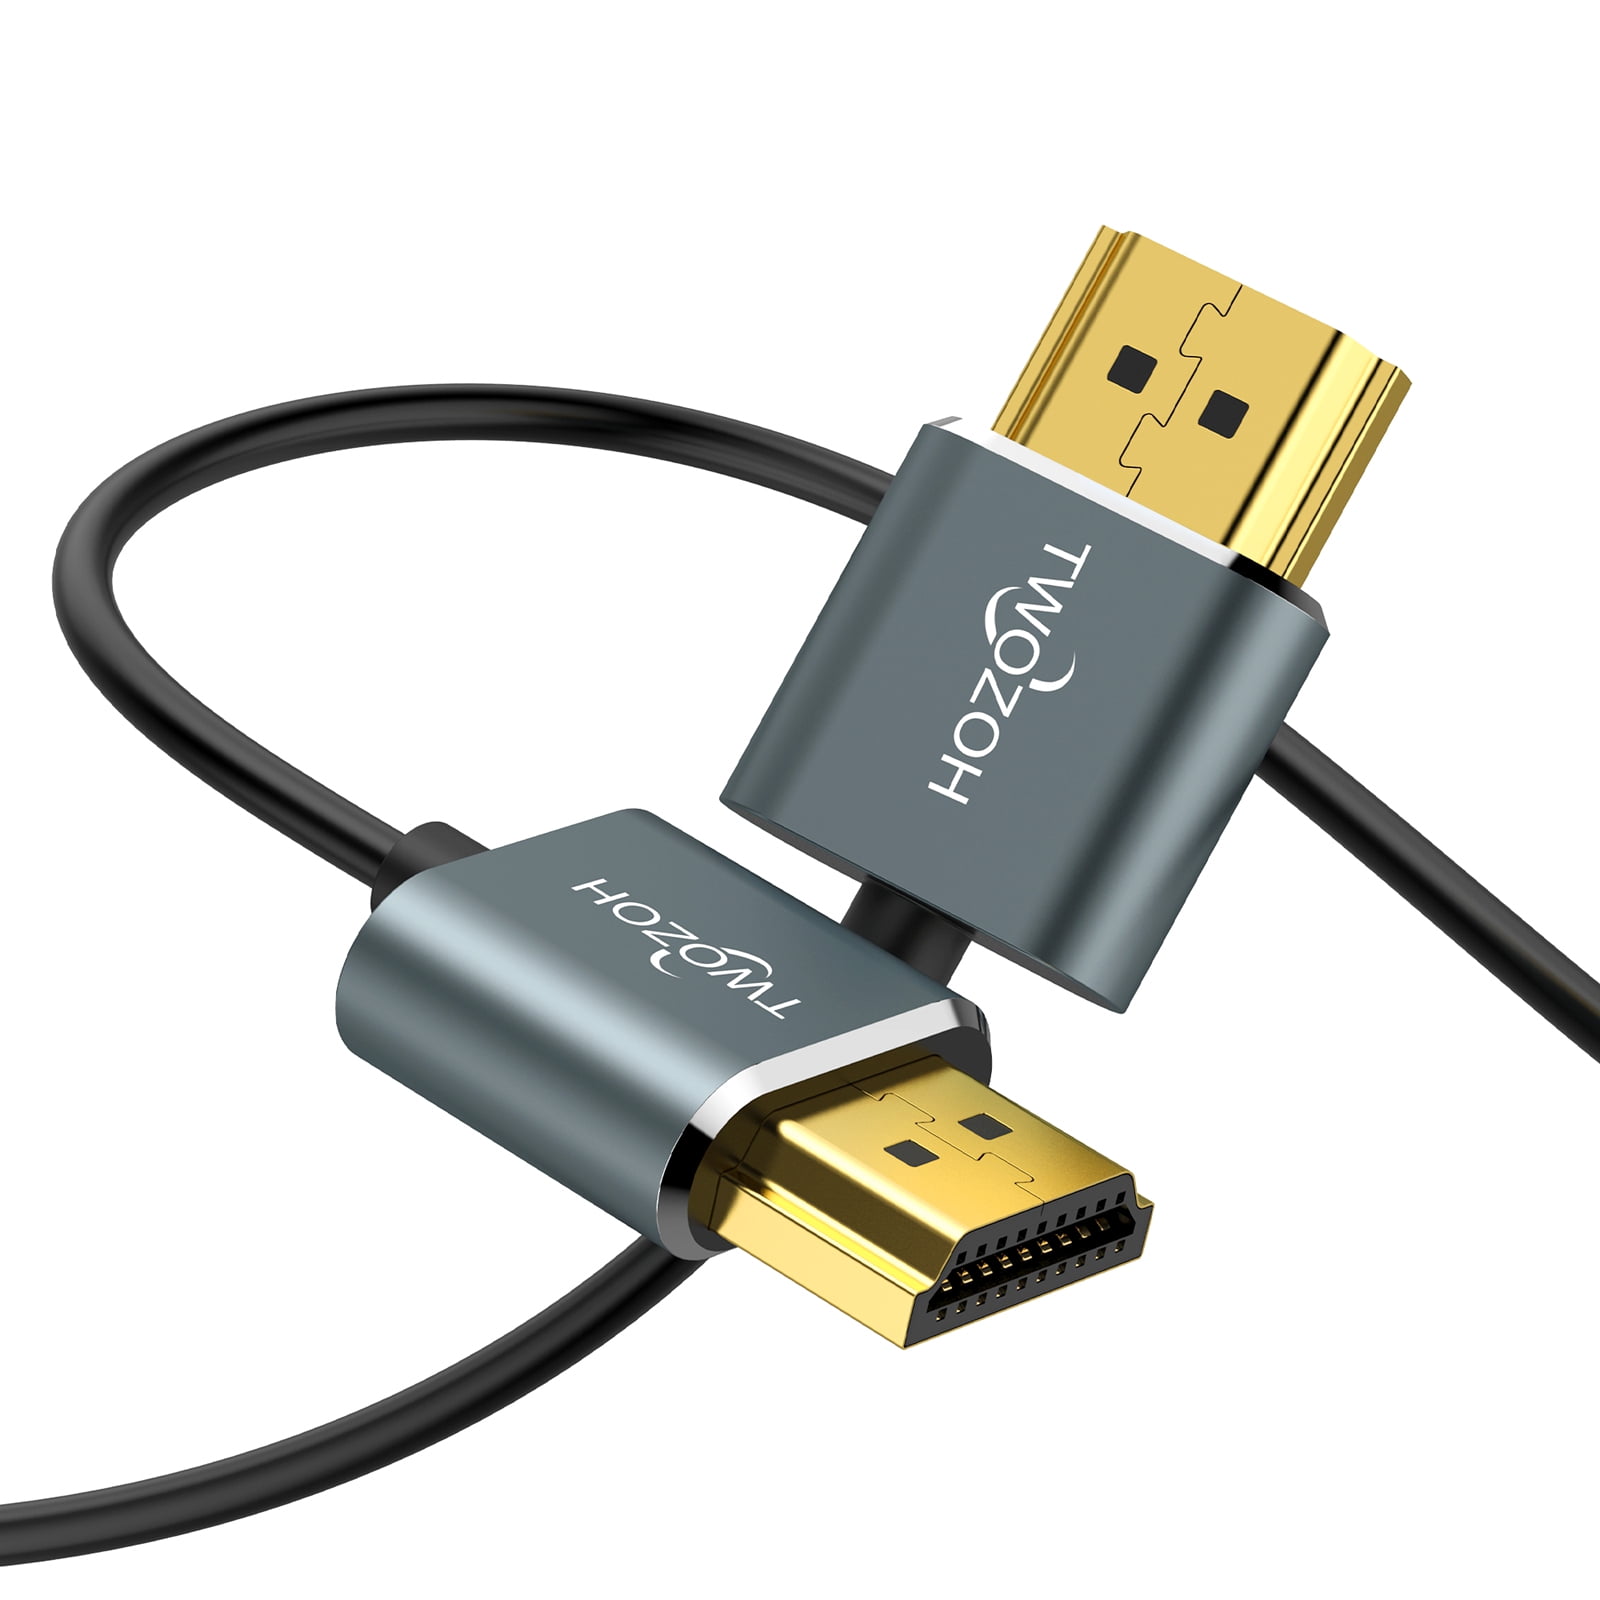 Twozoh Ultra-Thin HDMI to HDMI Cable 25Ft, Hyper Slim HDMI 2.0